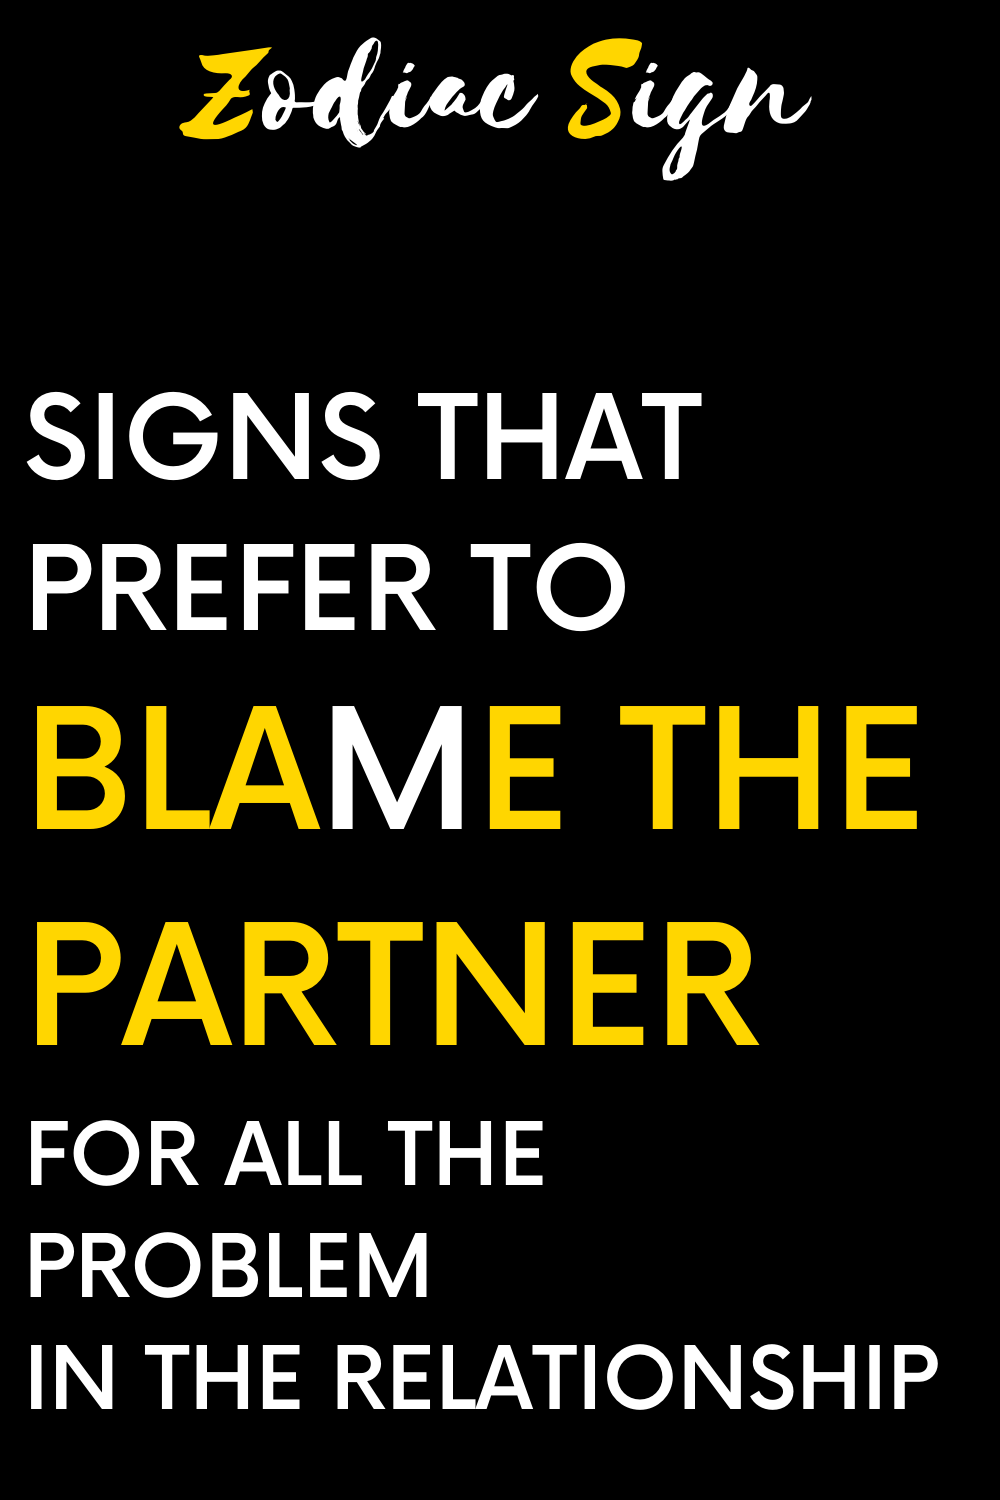 Signs that prefer to blame the partner for all the problem in the relationship